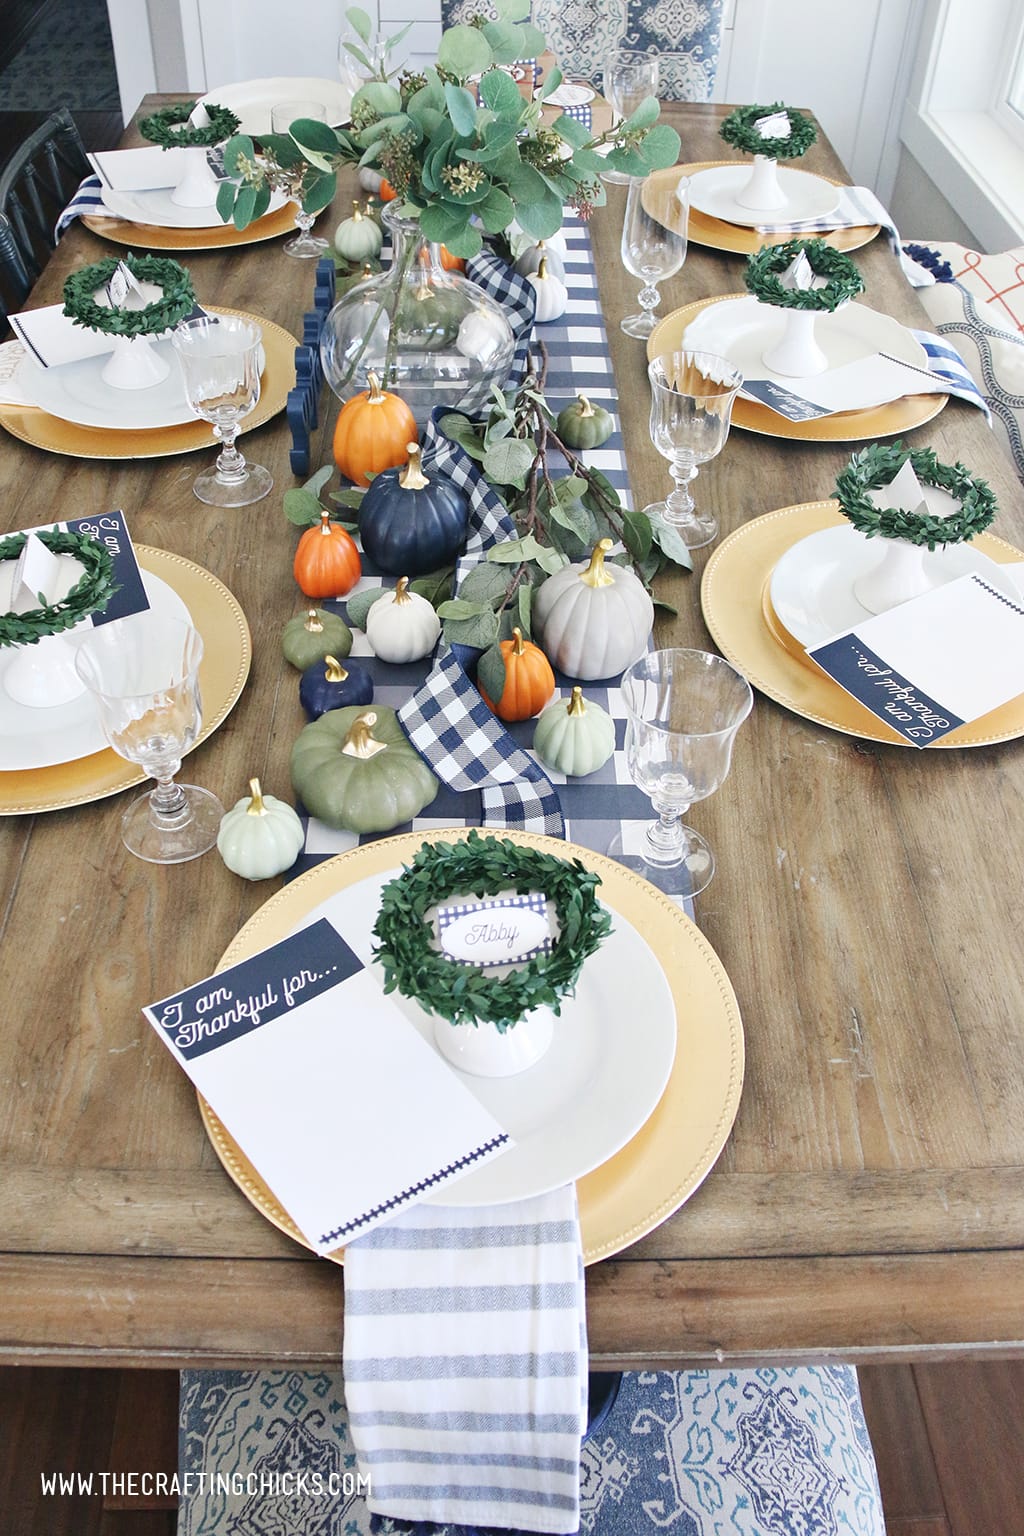 Thanksgiving table set with gold chargers and white plates. Printable navy and white placecards with wreaths and mini pumpkins.